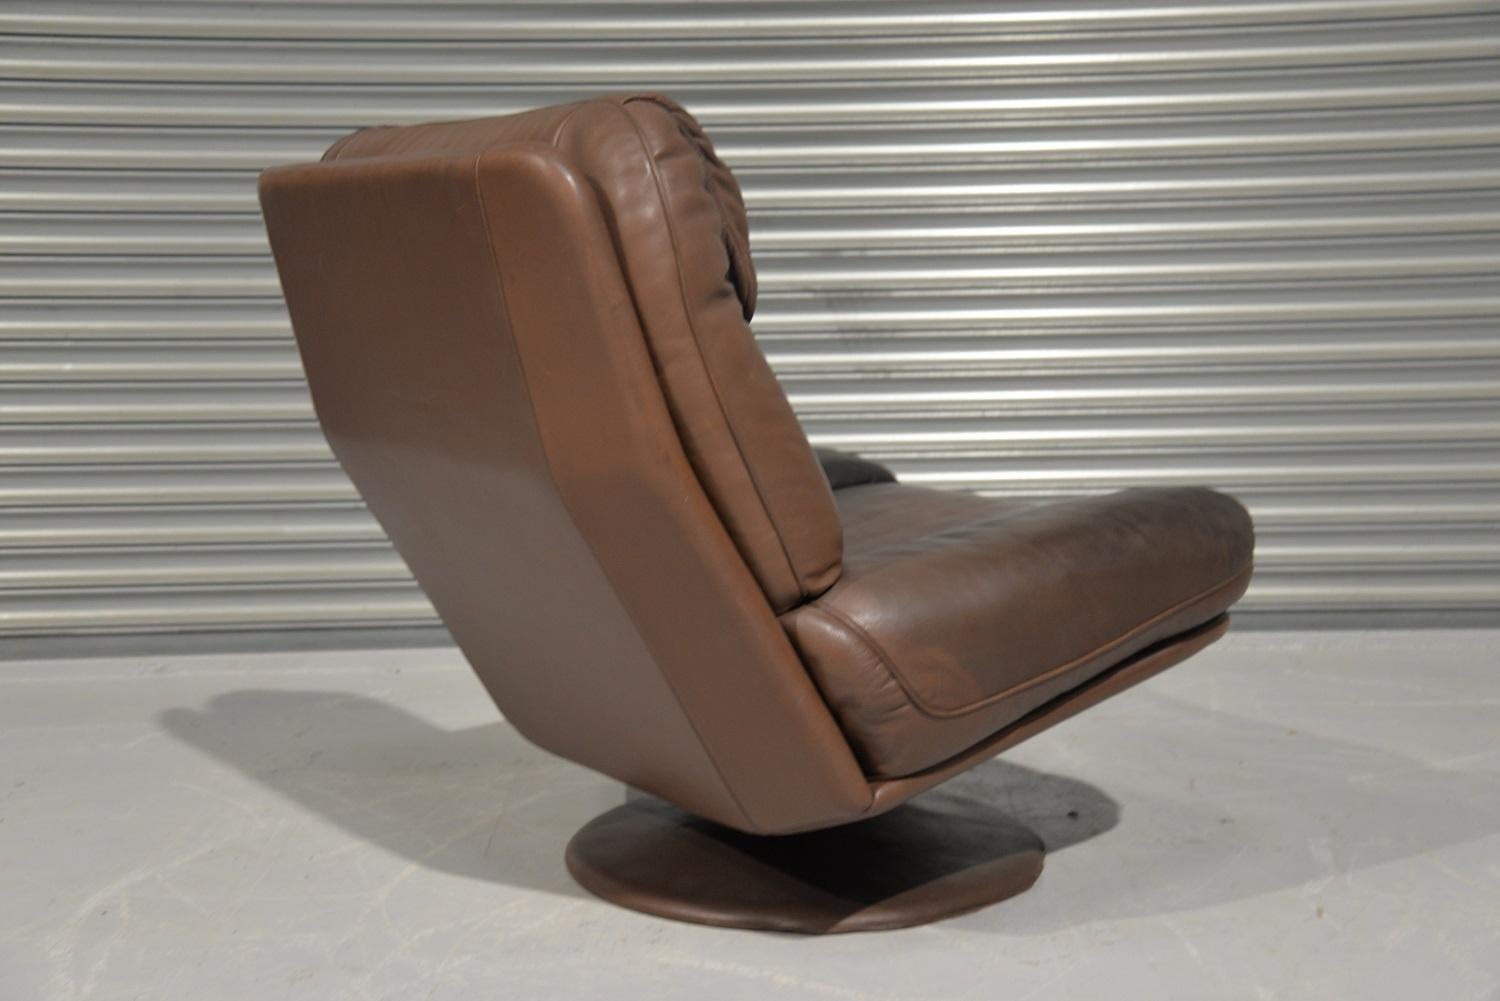 Vintage De Sede Leather Swivel Armchair and Ottoman, Switzerland, 1980s For Sale 4